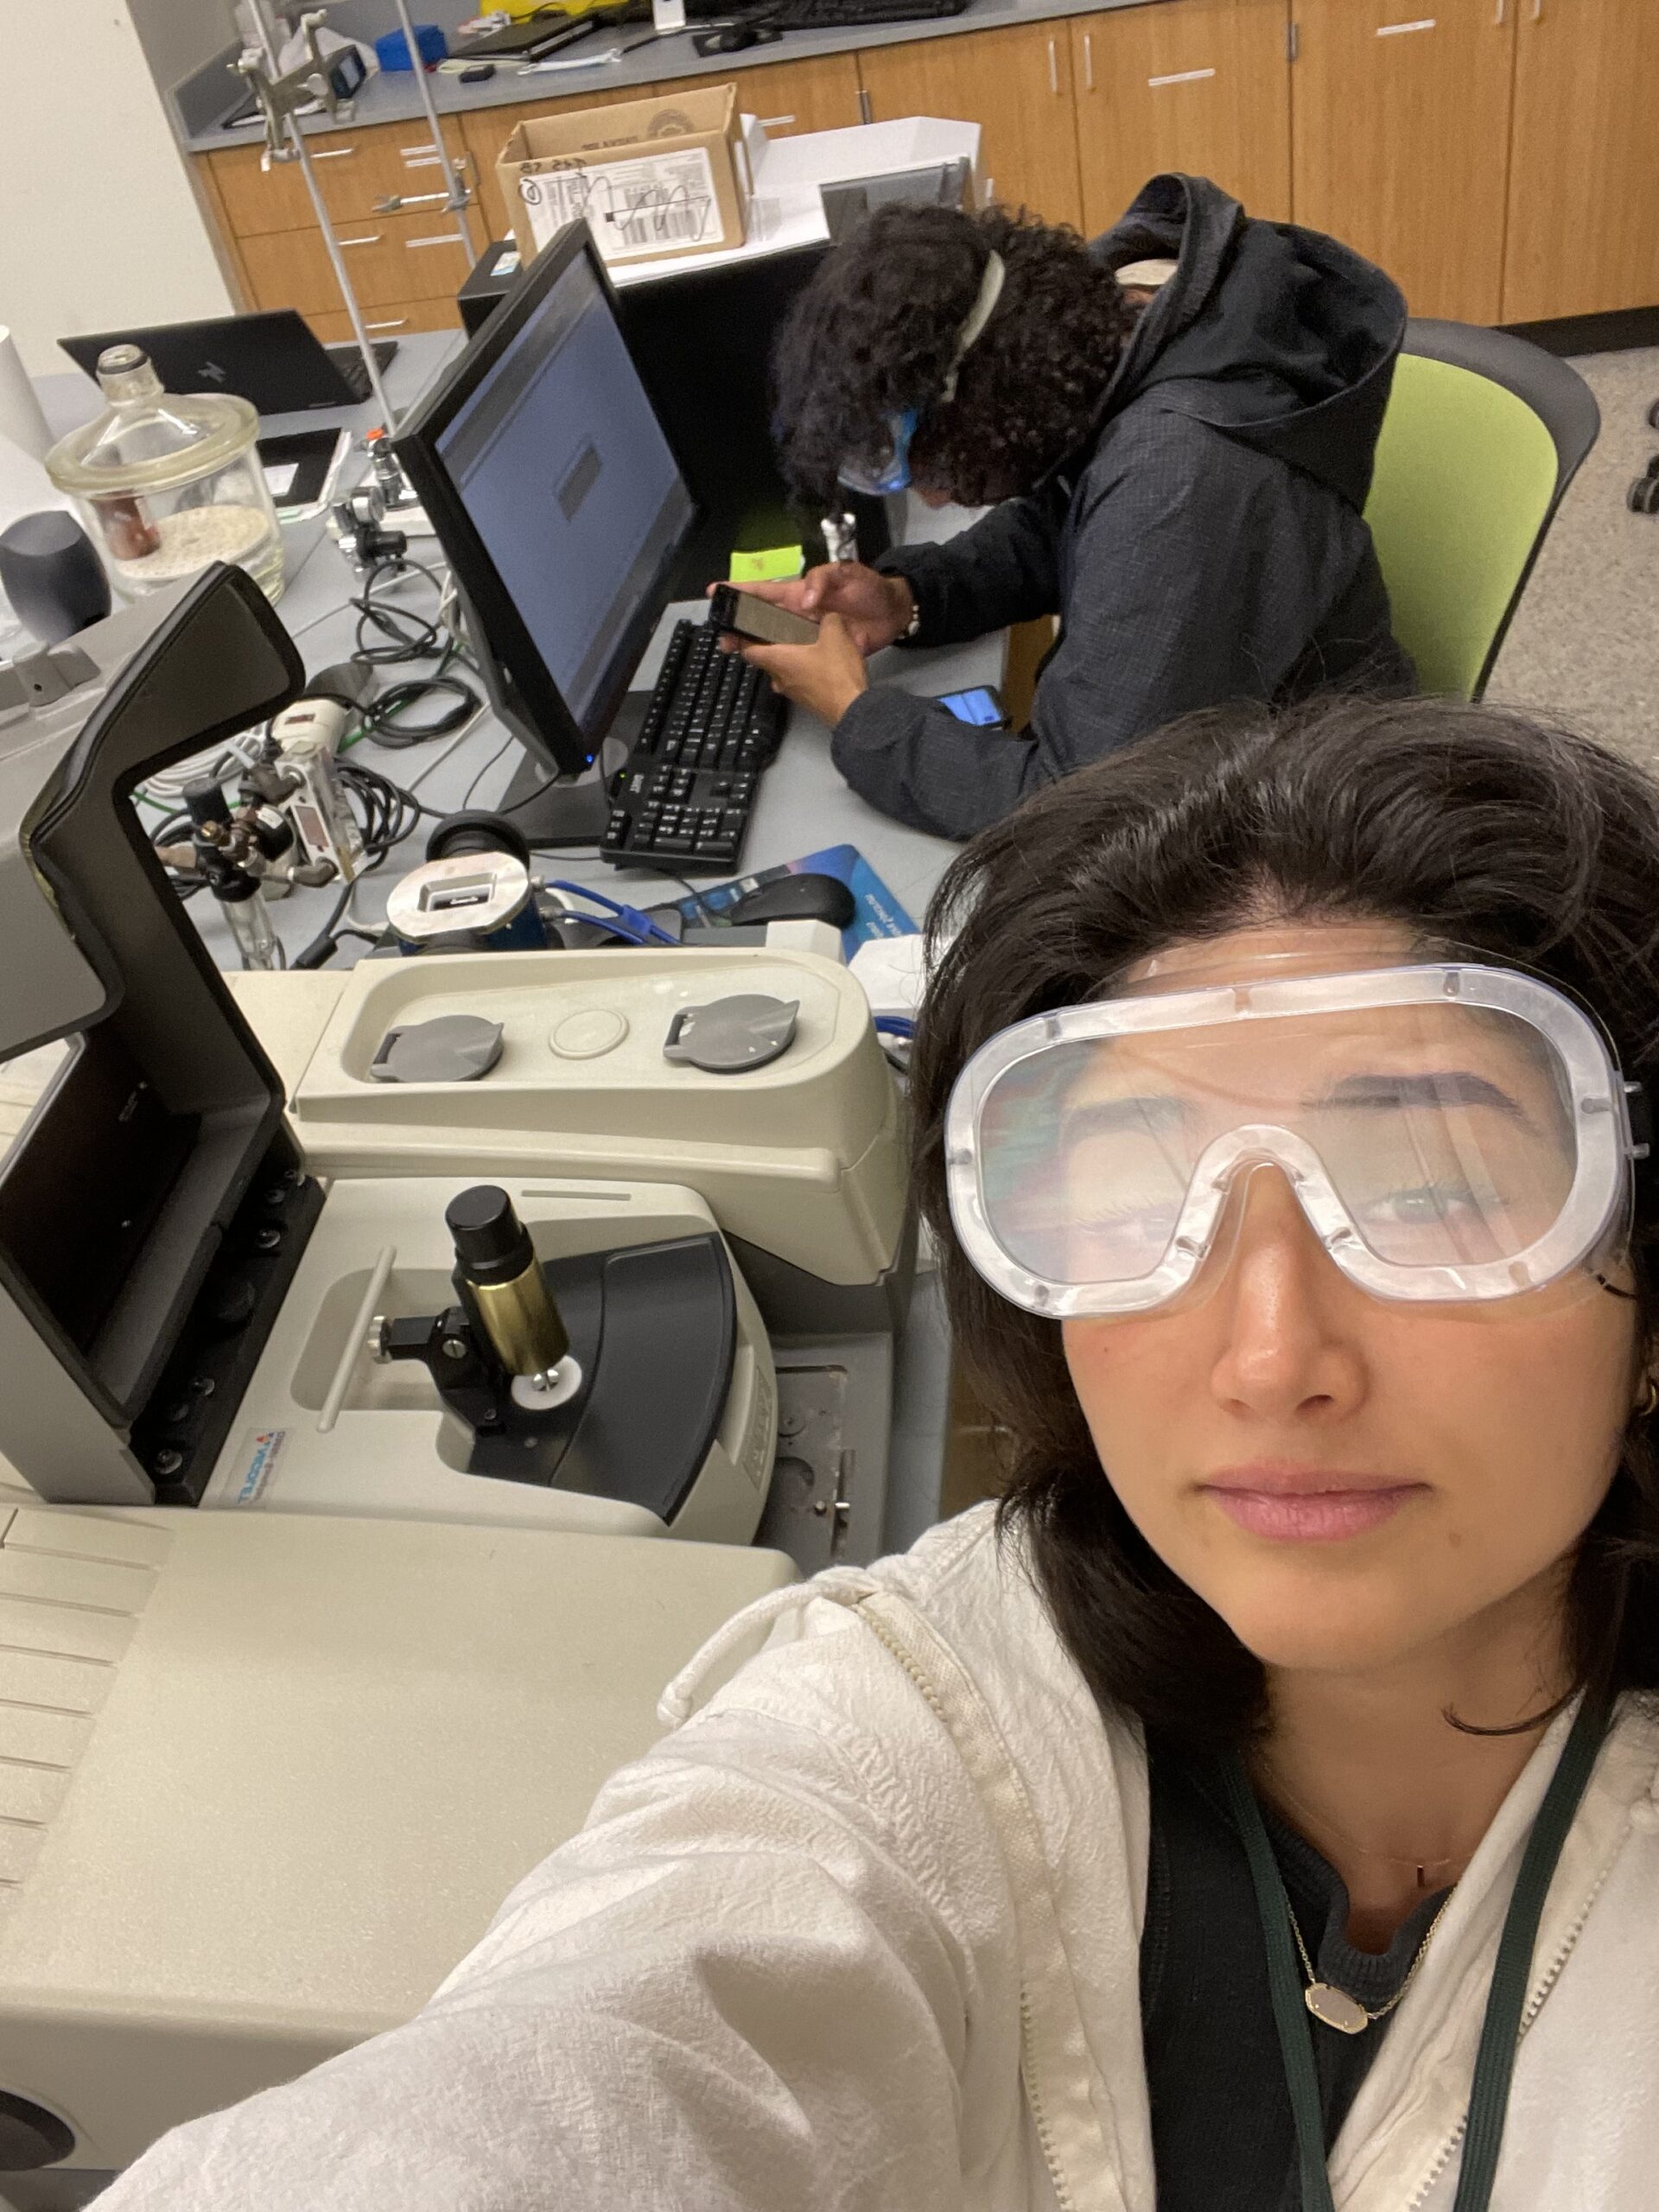 Student takes a selfie in the lab